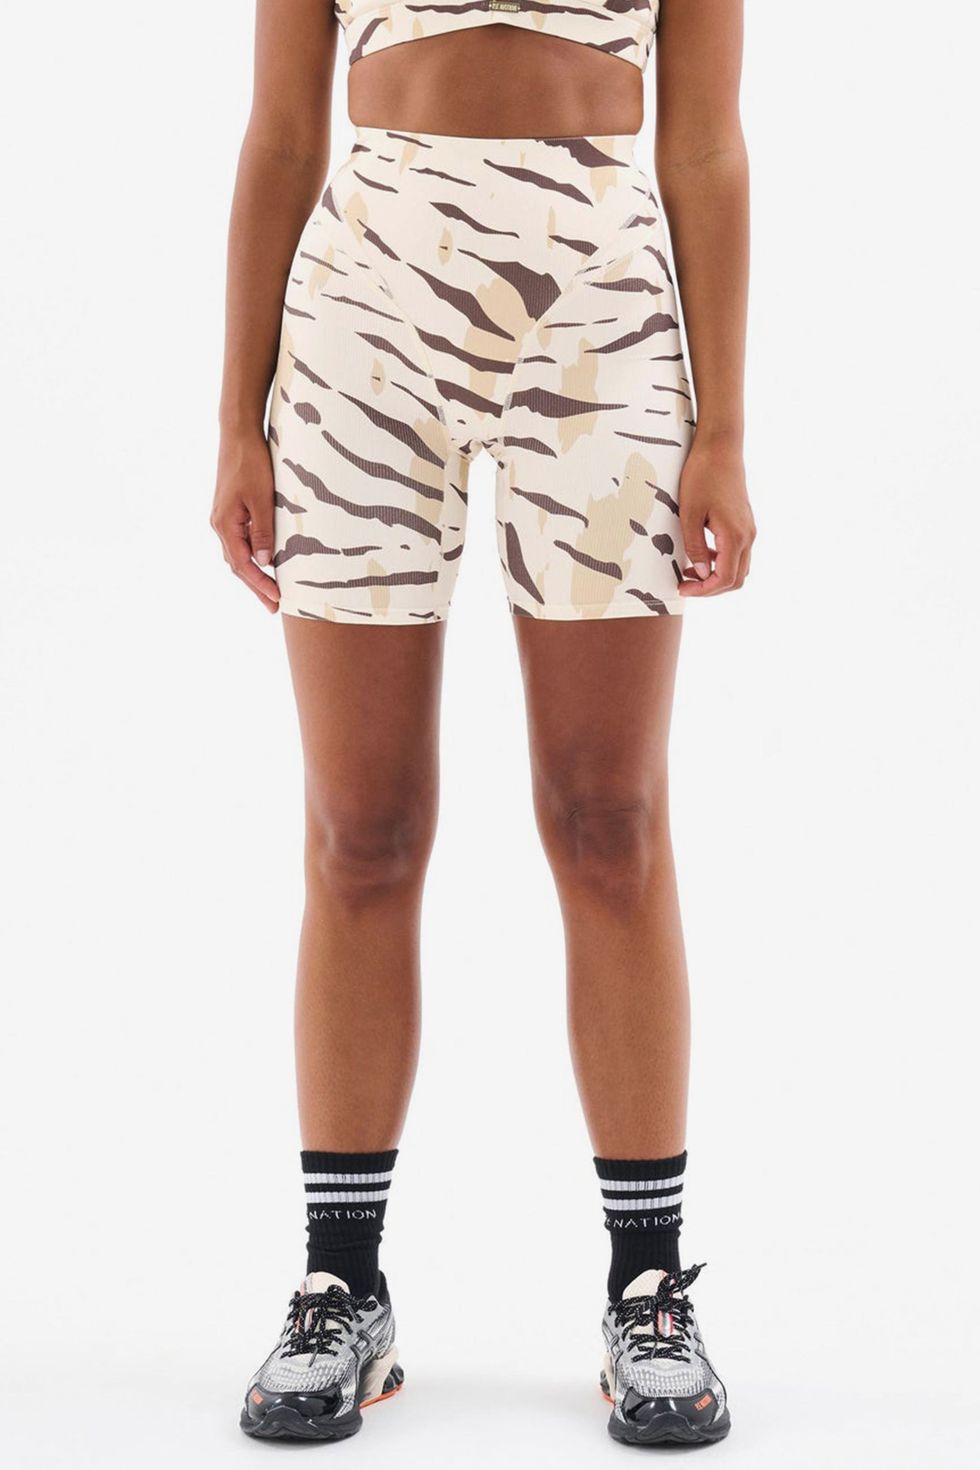 Biker Shorts Sale: Score Top-Rated Activewear For 40% Off